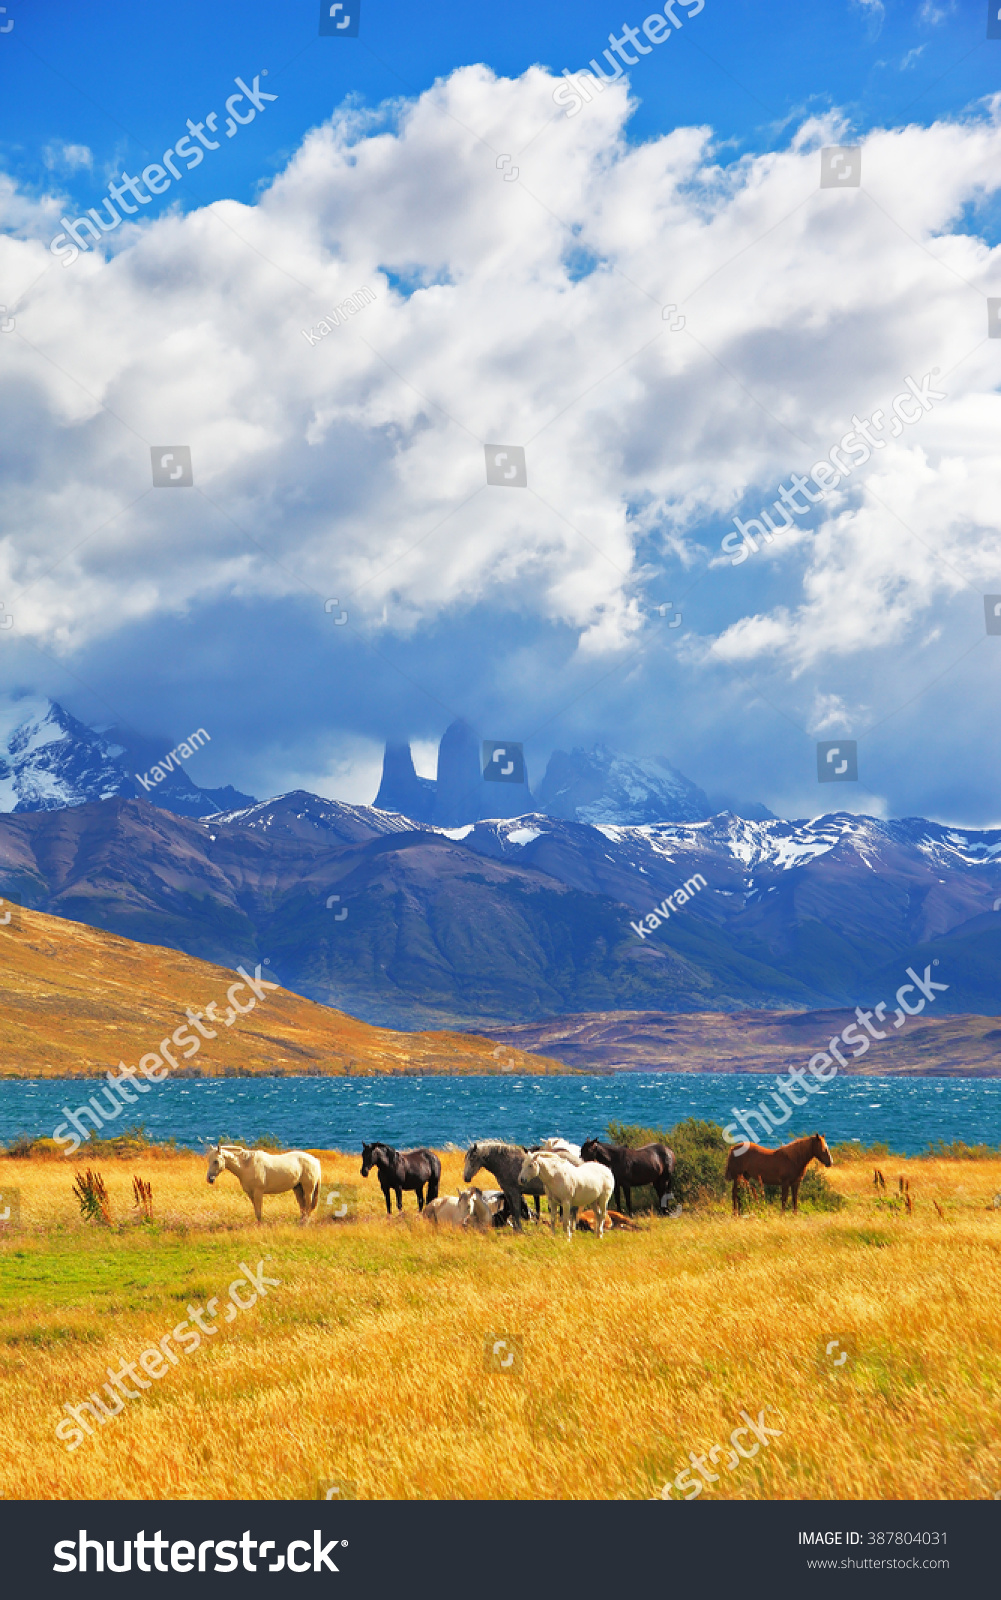 Beautiful thoroughbred horse grazing in a meadow near the lake. On the horizon, towering cliffs Torres del Paine #387804031